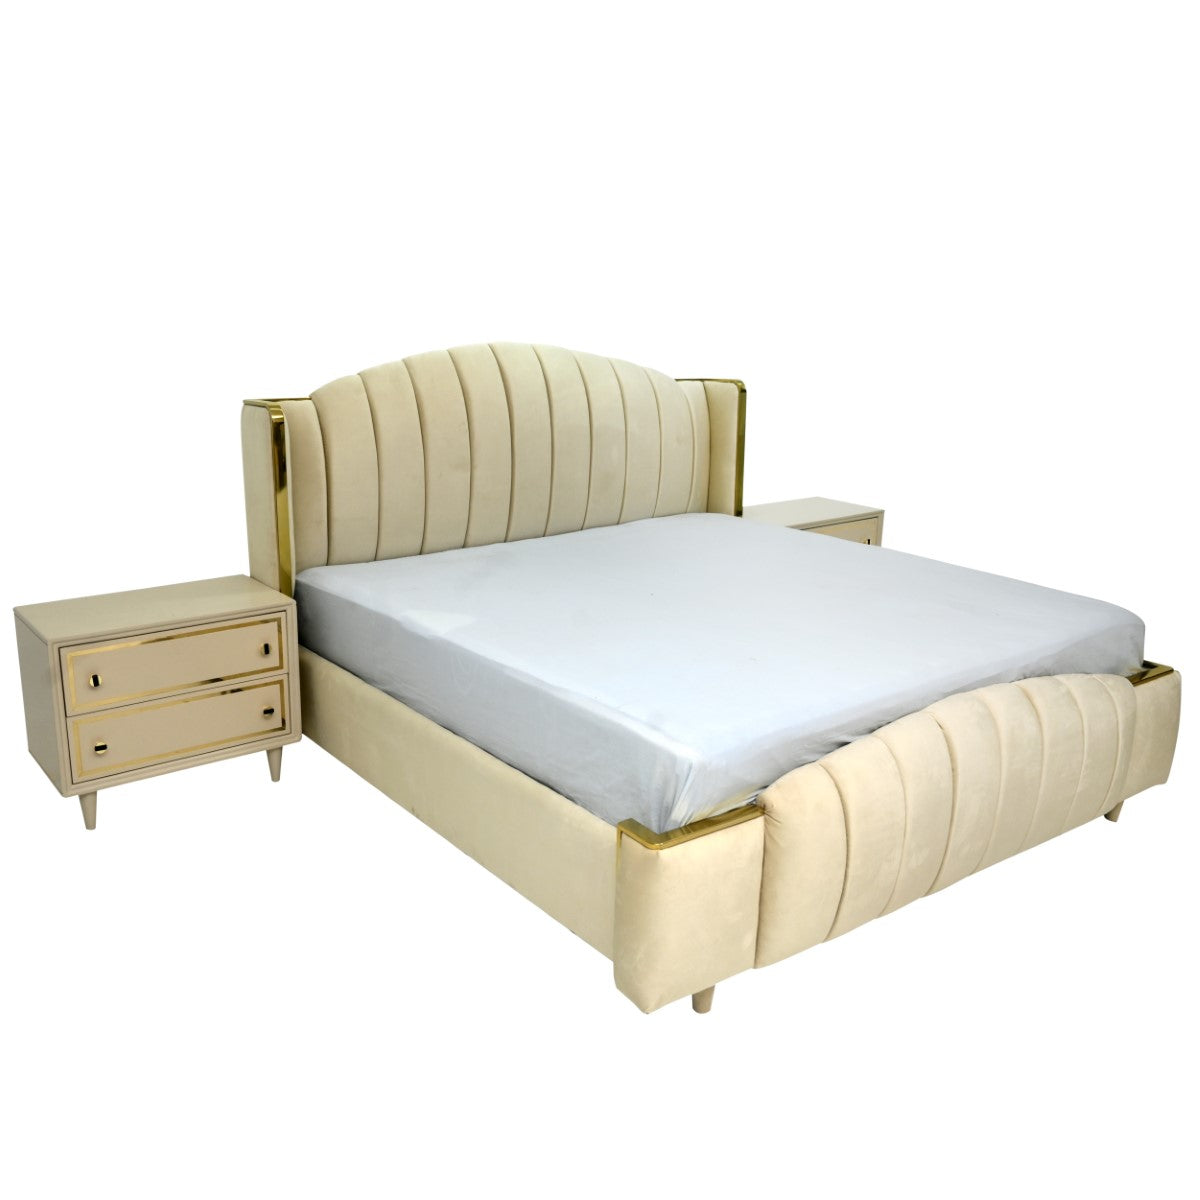 Opulent King Size Bed with 2 Side Tables